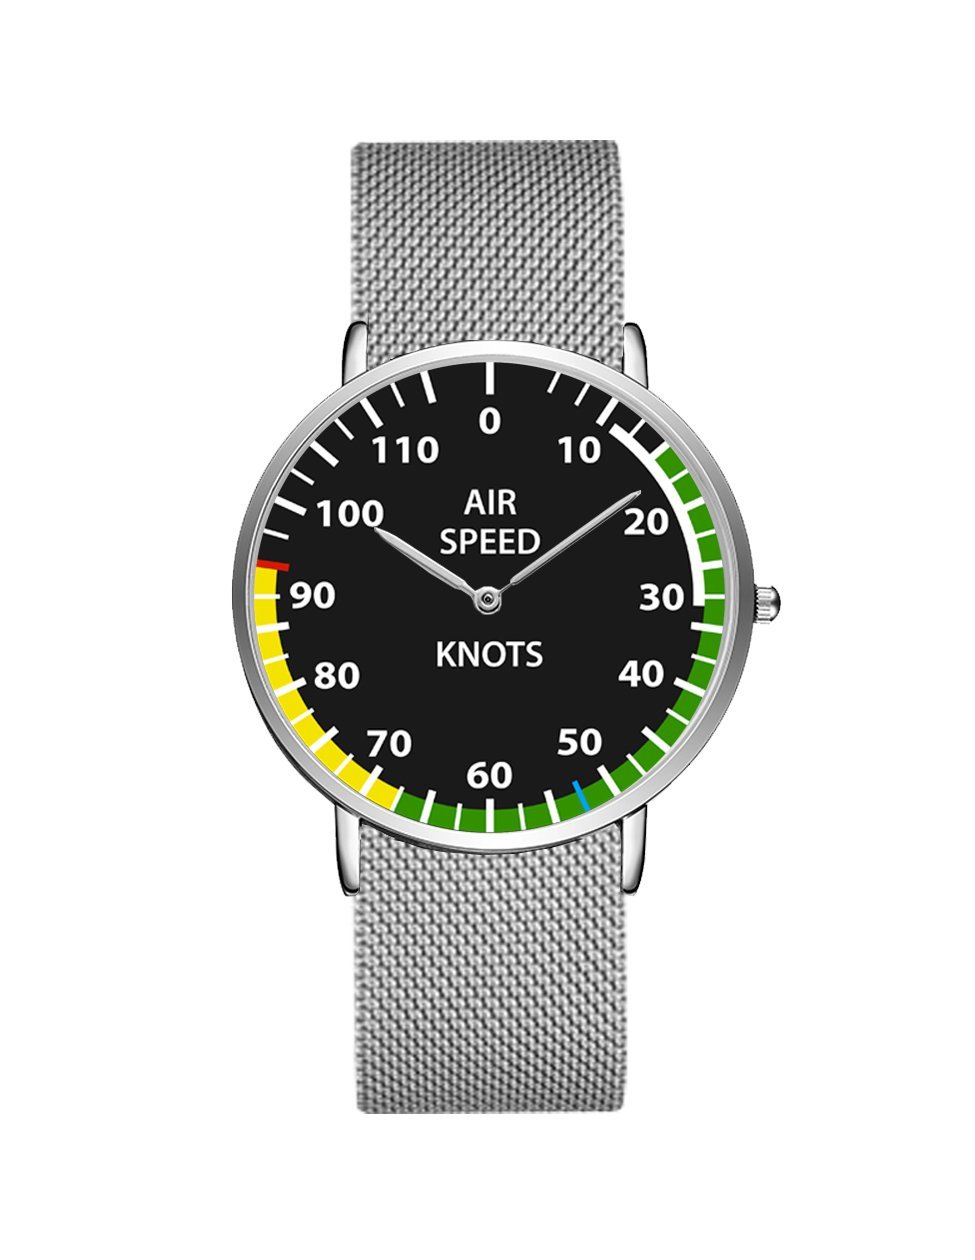 Airplane Instrument Series (Airspeed) Stainless Steel Strap Watches Pilot Eyes Store Silver & Silver Stainless Steel Strap 